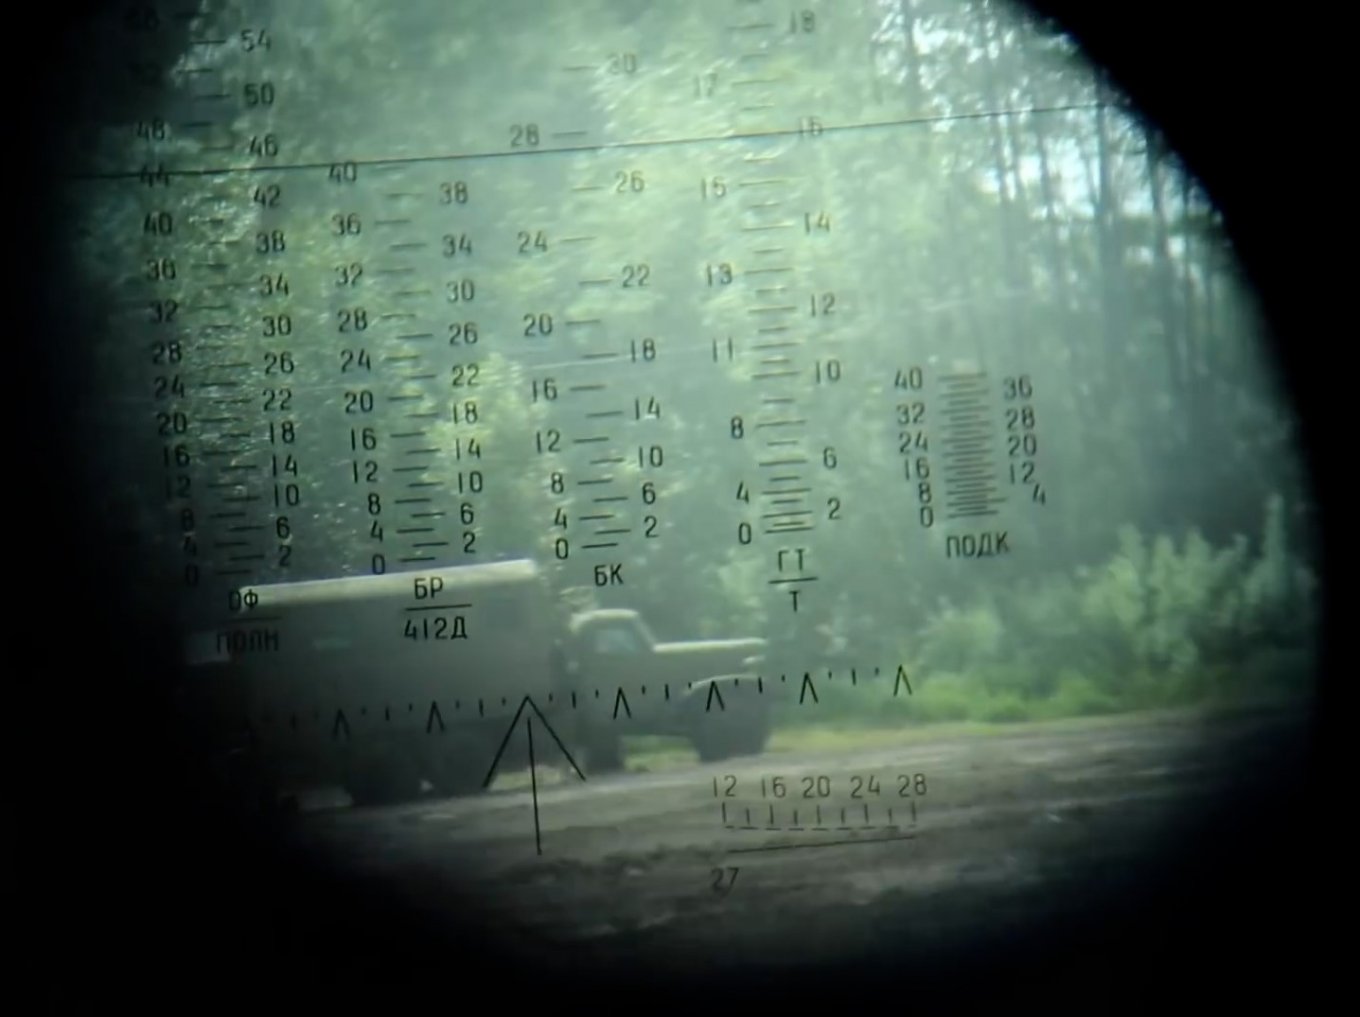 Reticle of the TSH-2B-32P sight of the T-55 tank, russia’s T-55 tanks Reached the Front Line: How Long Did it Take and What Does it Mean, Defense Express